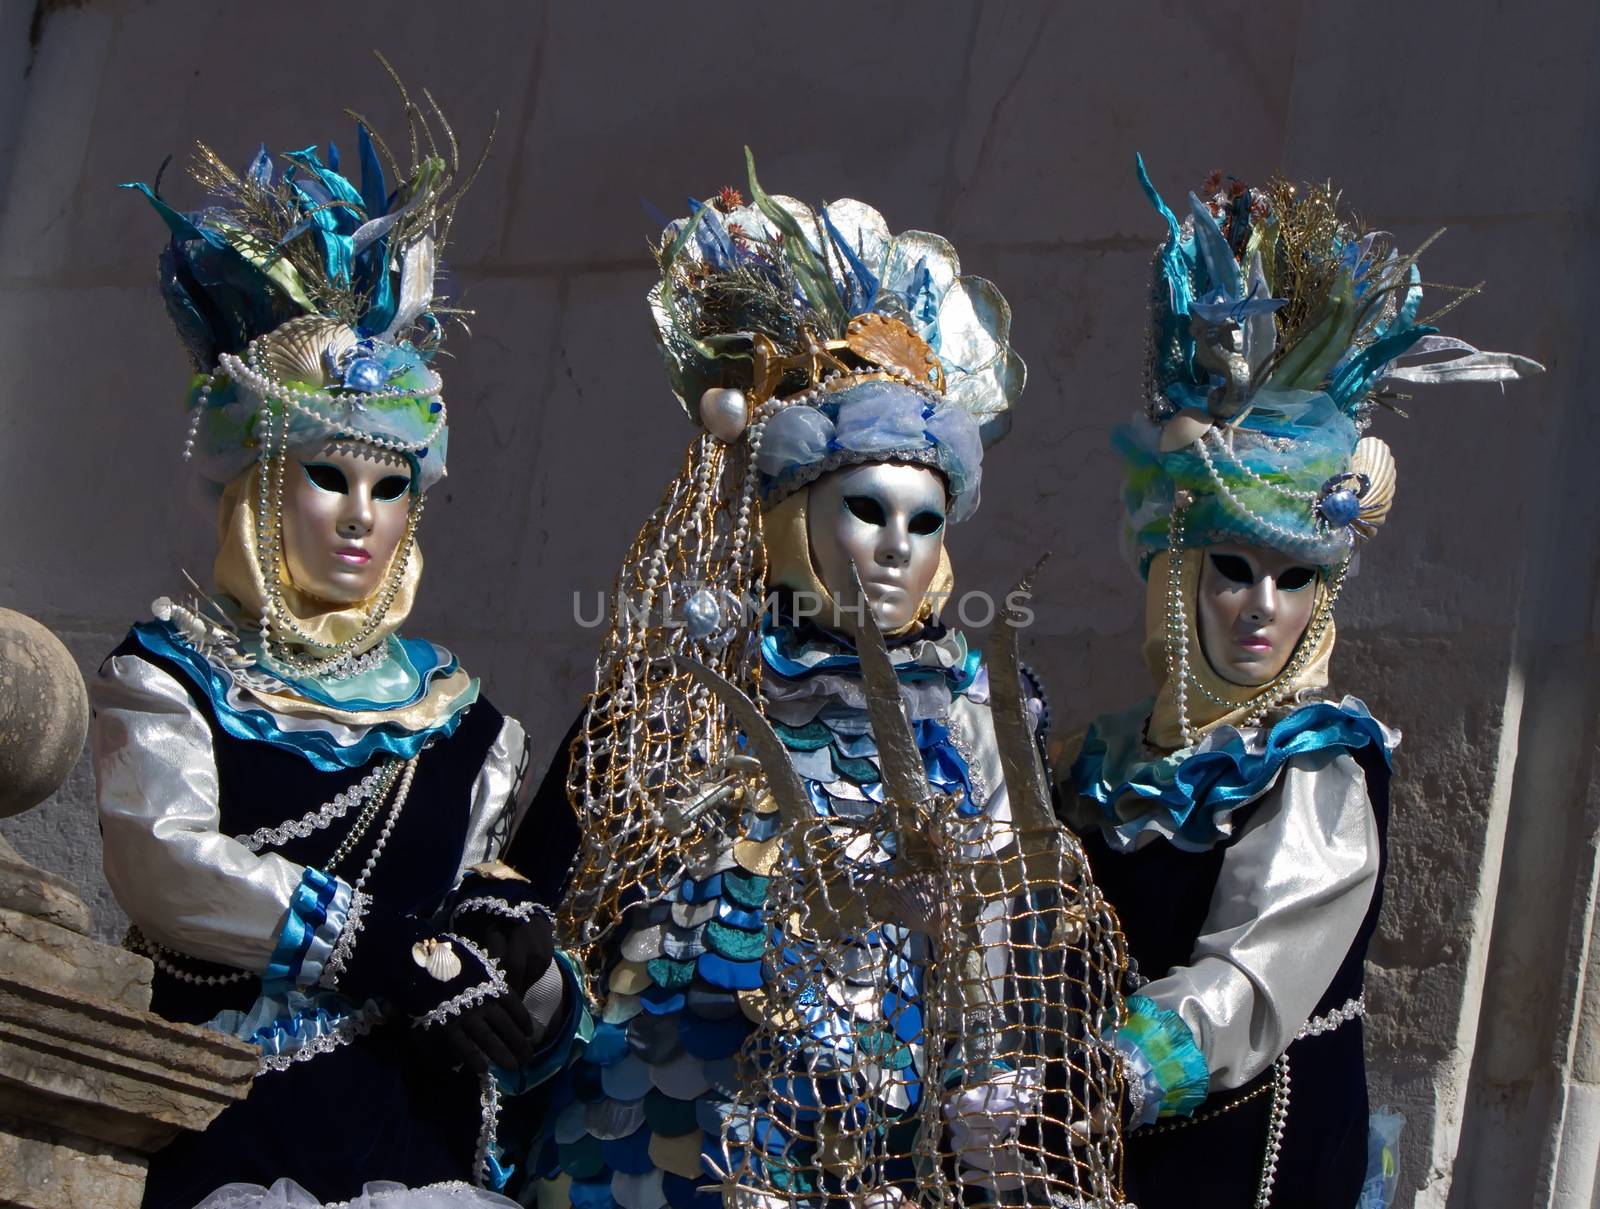 Three blue people at the 2014 Annecy venetian carnival, France